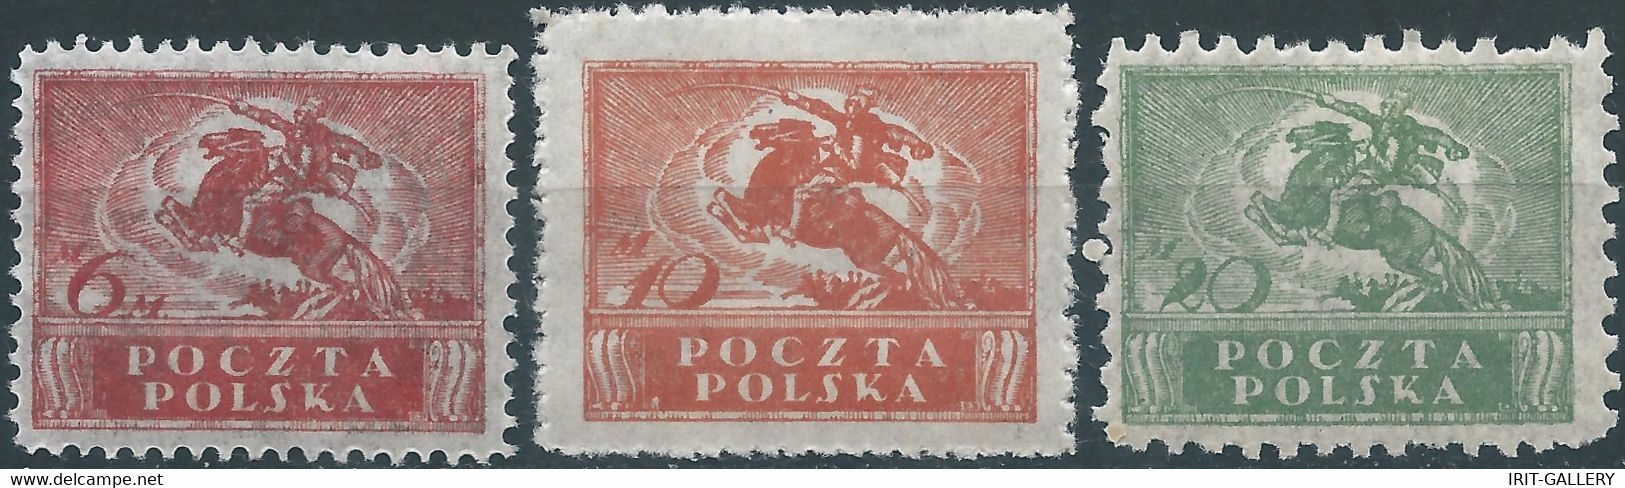 POLONIA-POLAND-POLSKA,1919 South And North Poland Issues,Mint - Unused Stamps